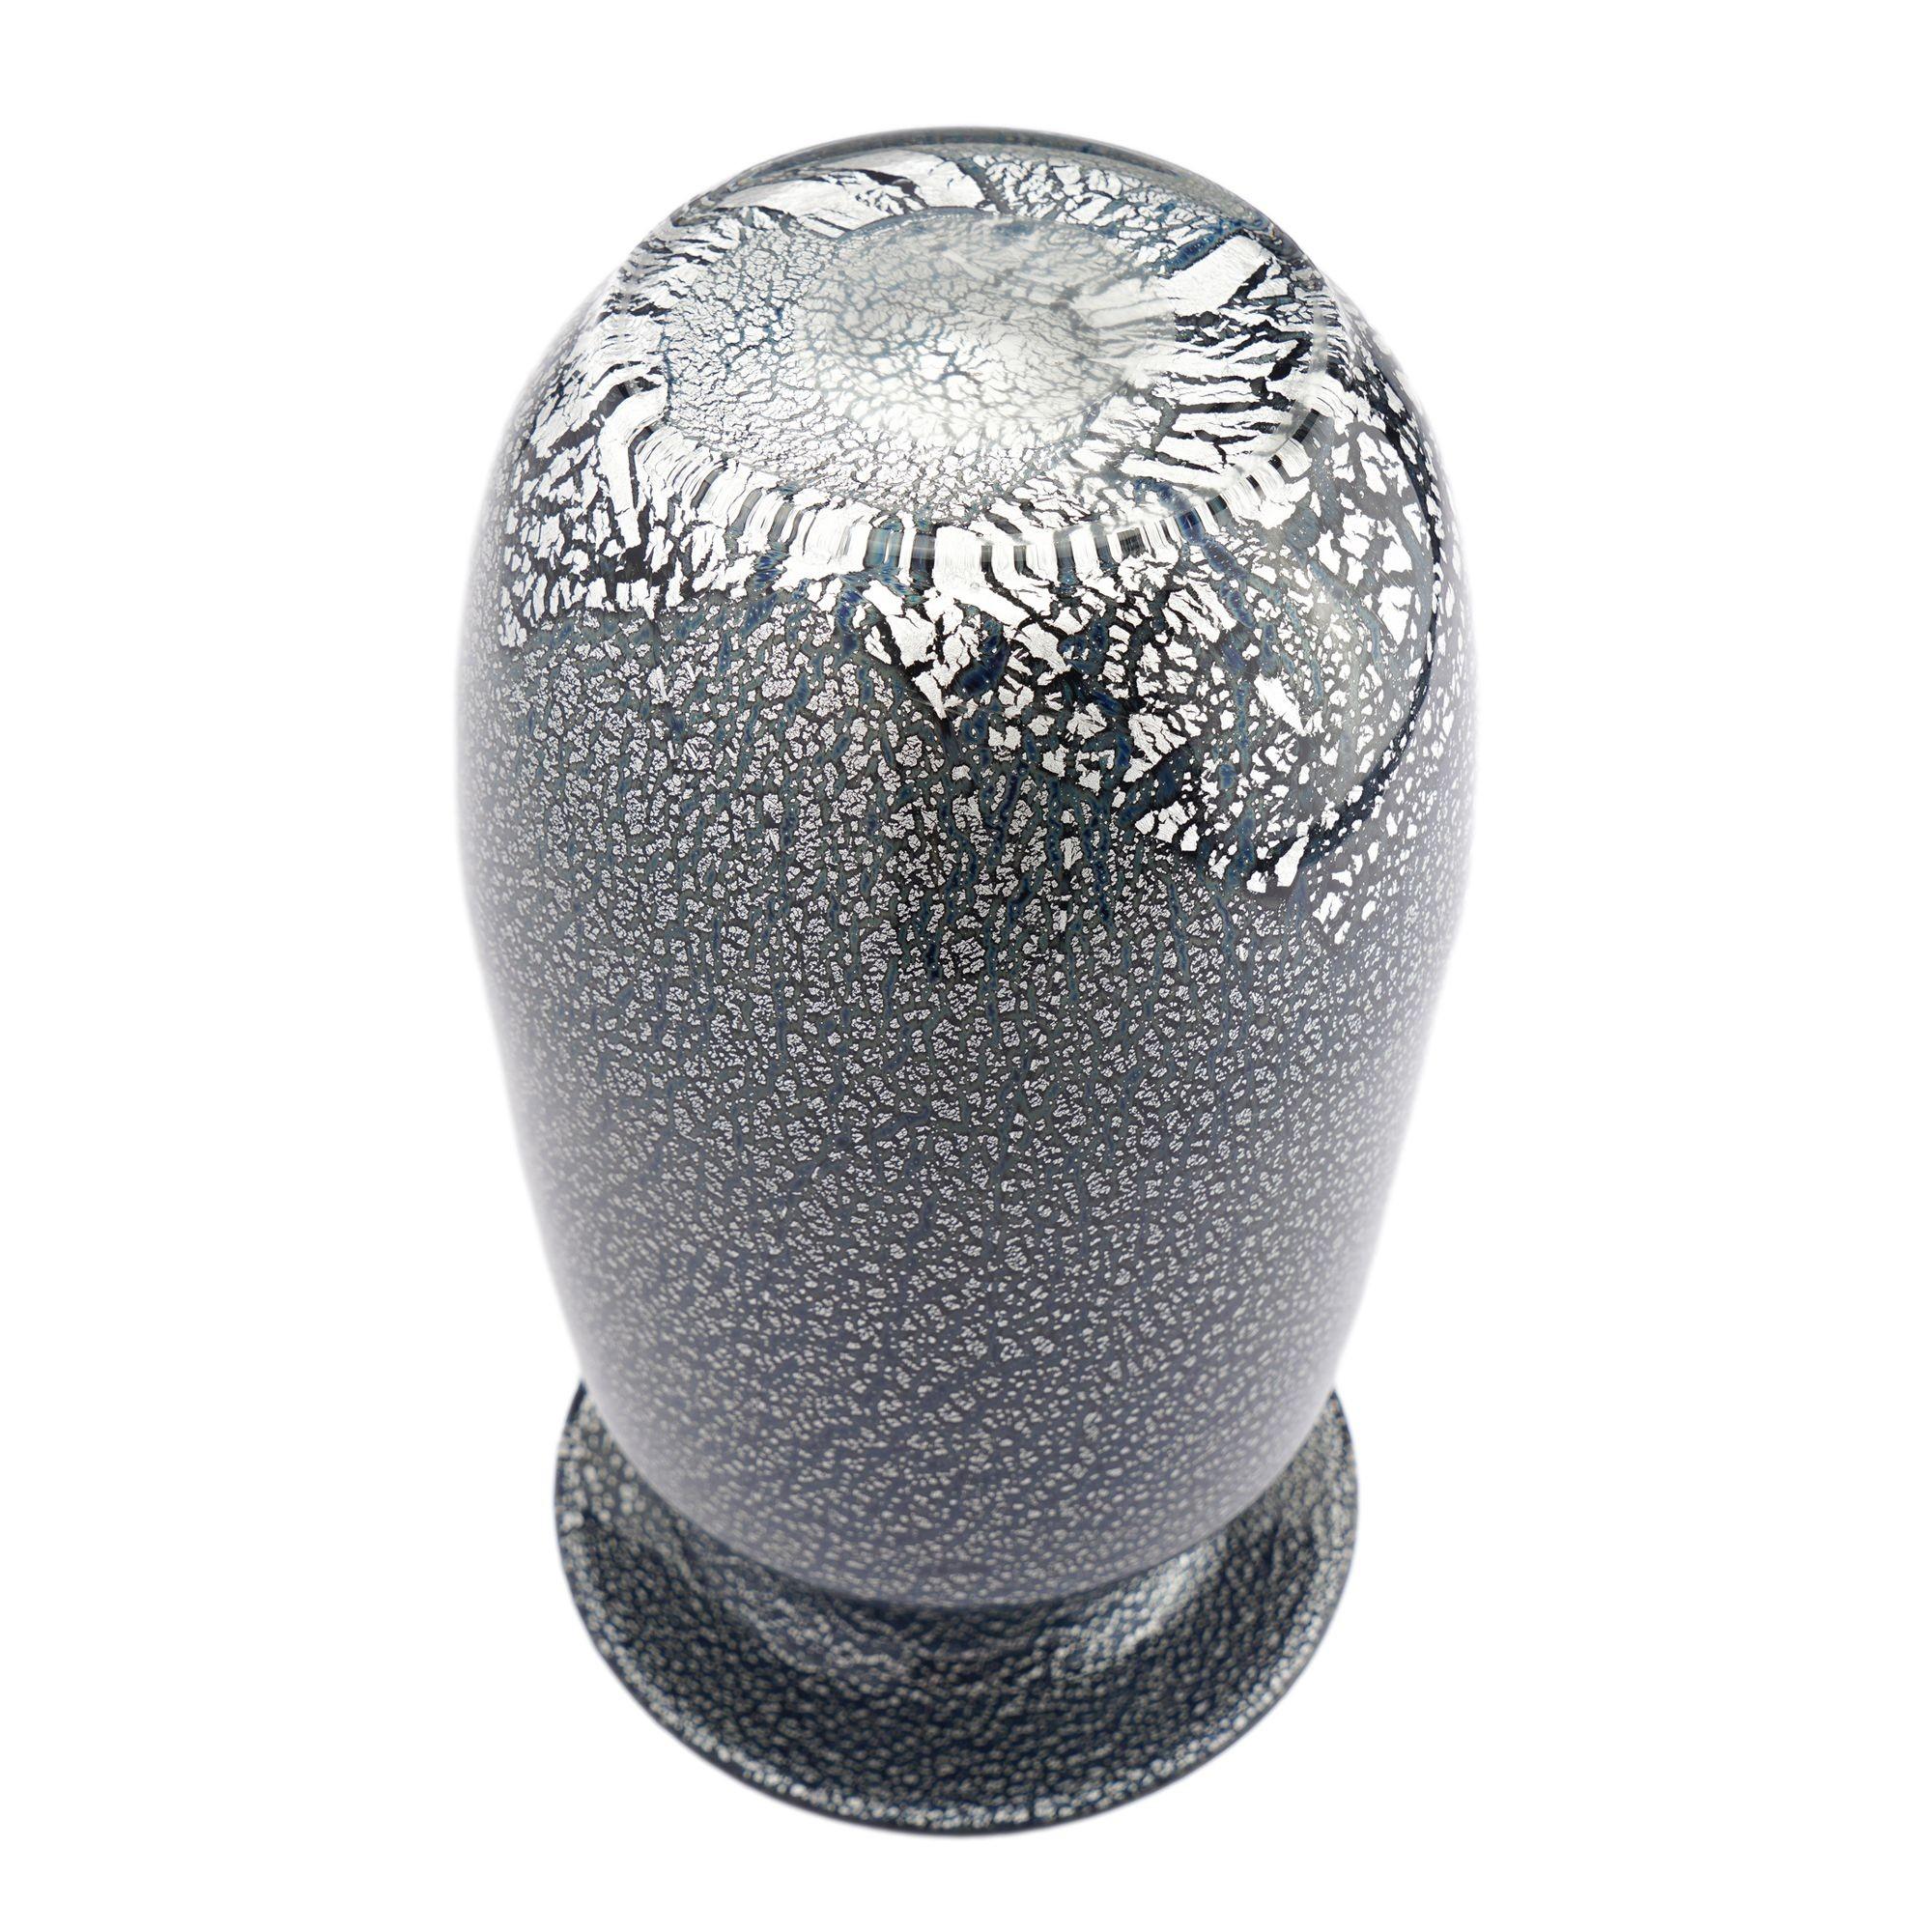 Silver leaf infused blown case glass vase by Seguso Verti d'Arte, 1970 For Sale 1